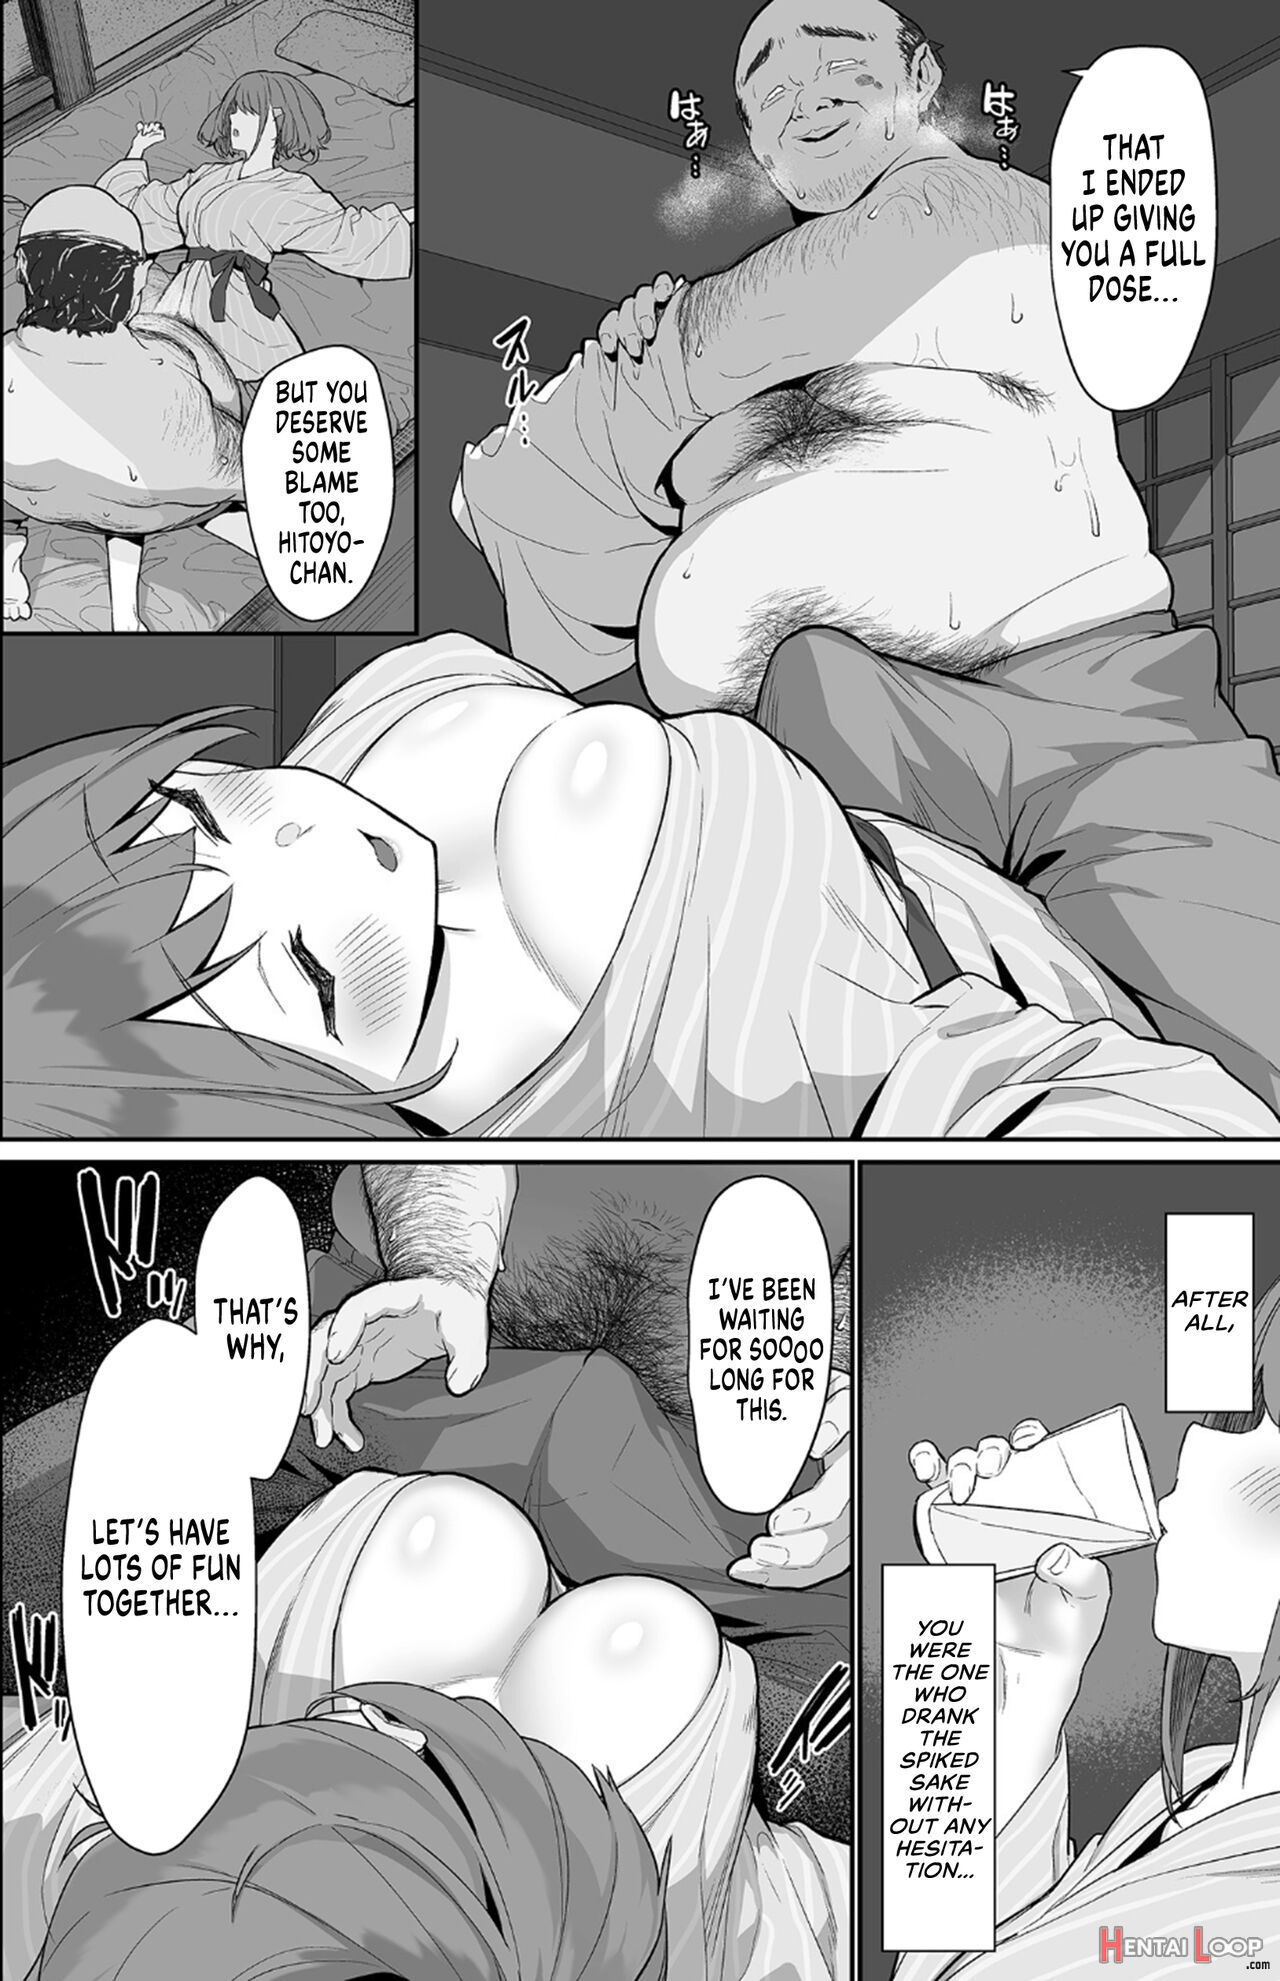 Hitoyo-chan's Suffering 2 page 8